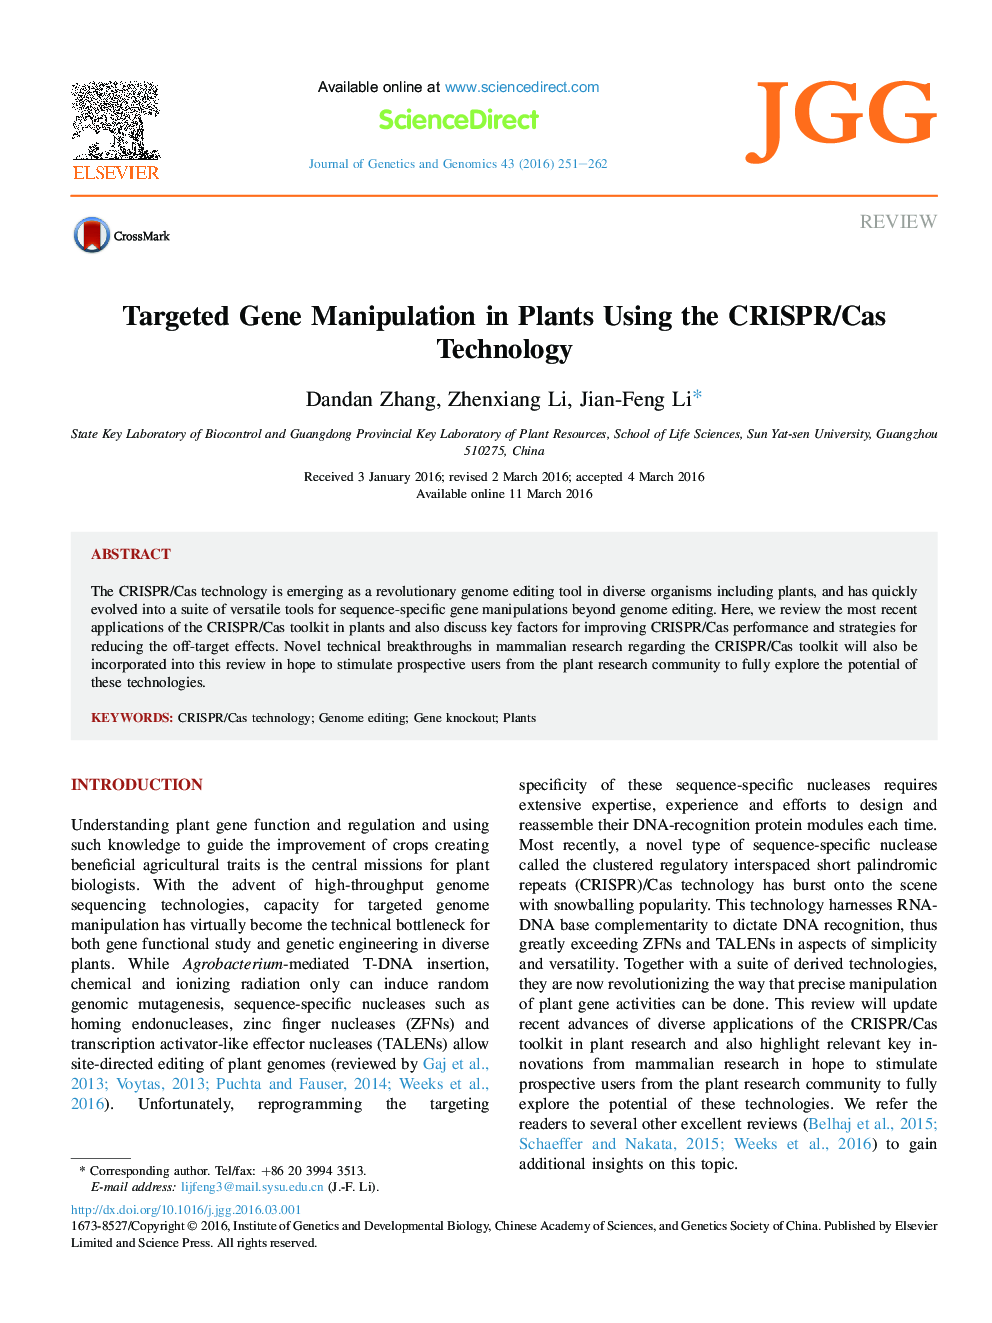 ReviewTargeted Gene Manipulation in Plants Using the CRISPR/Cas Technology